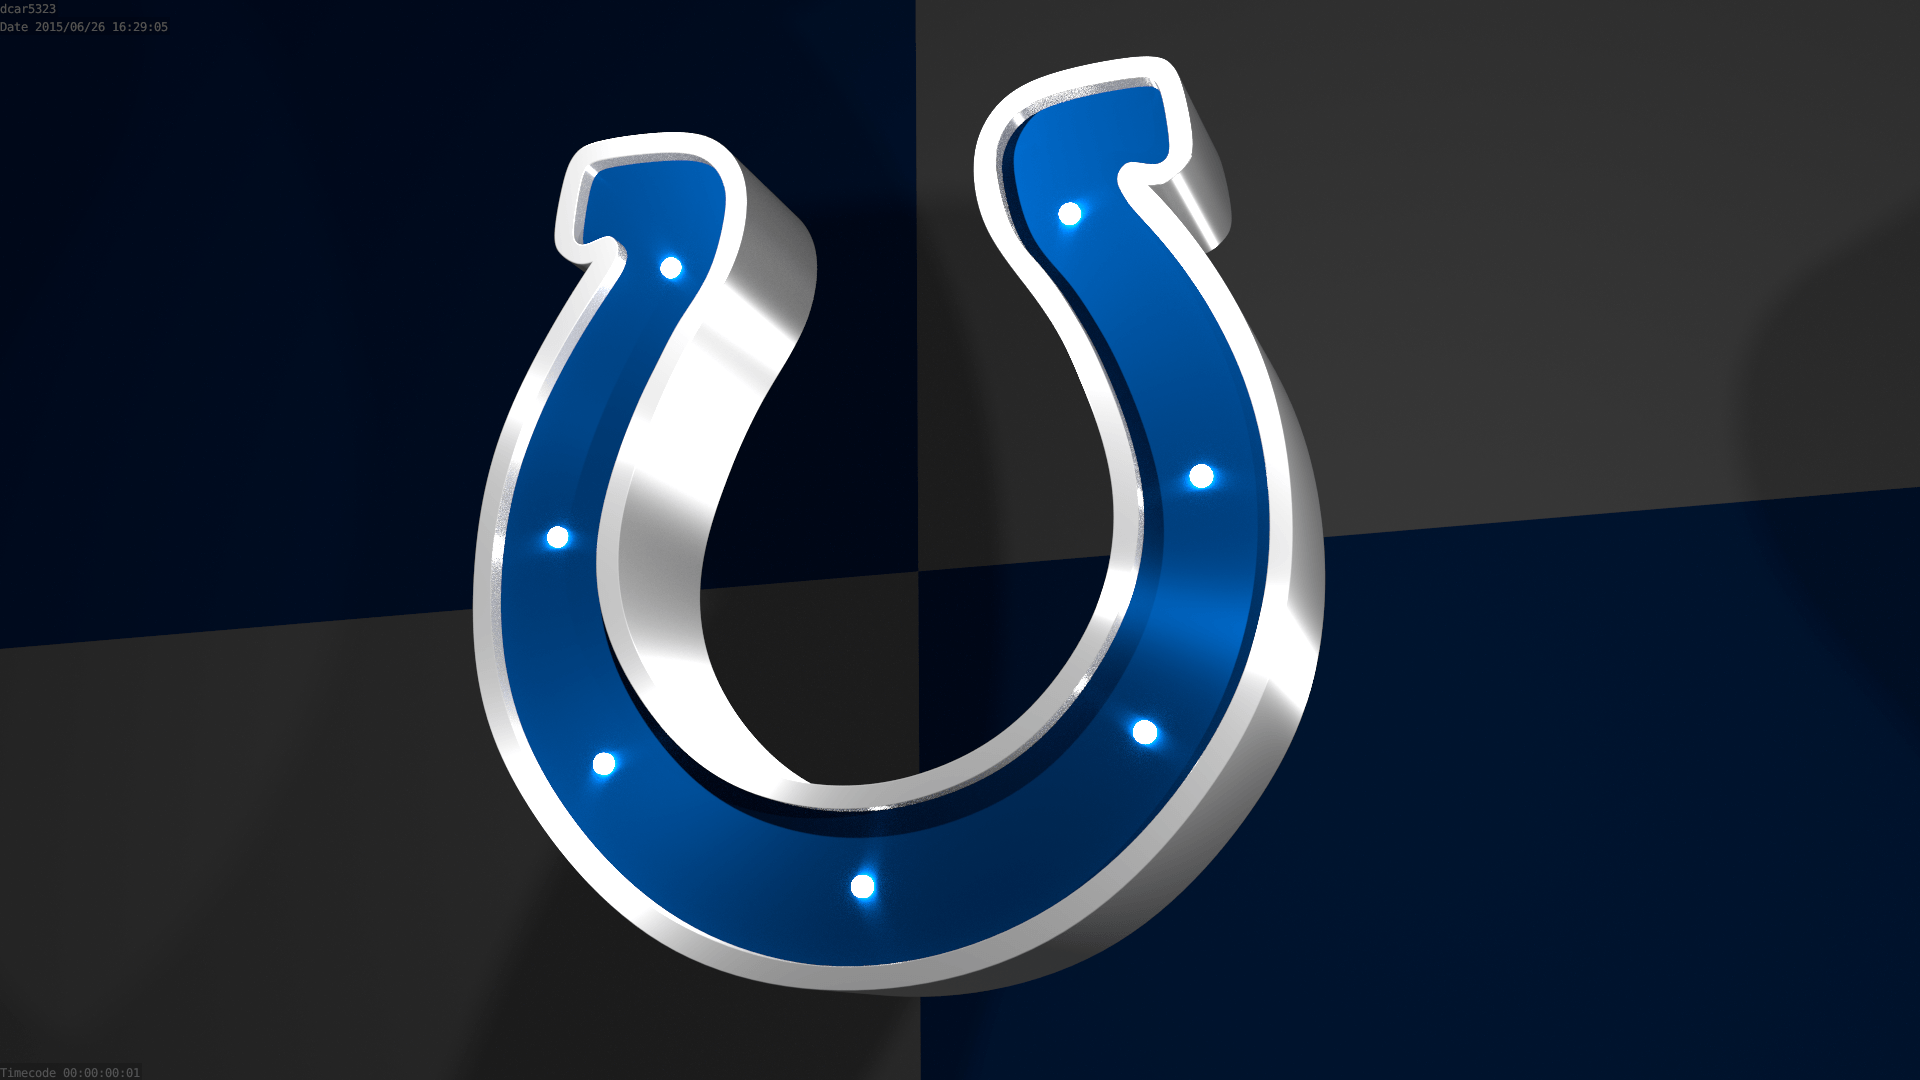 Colts Logo - I'm learning how to 3D Model, so I'm recreating NFL logos as ...